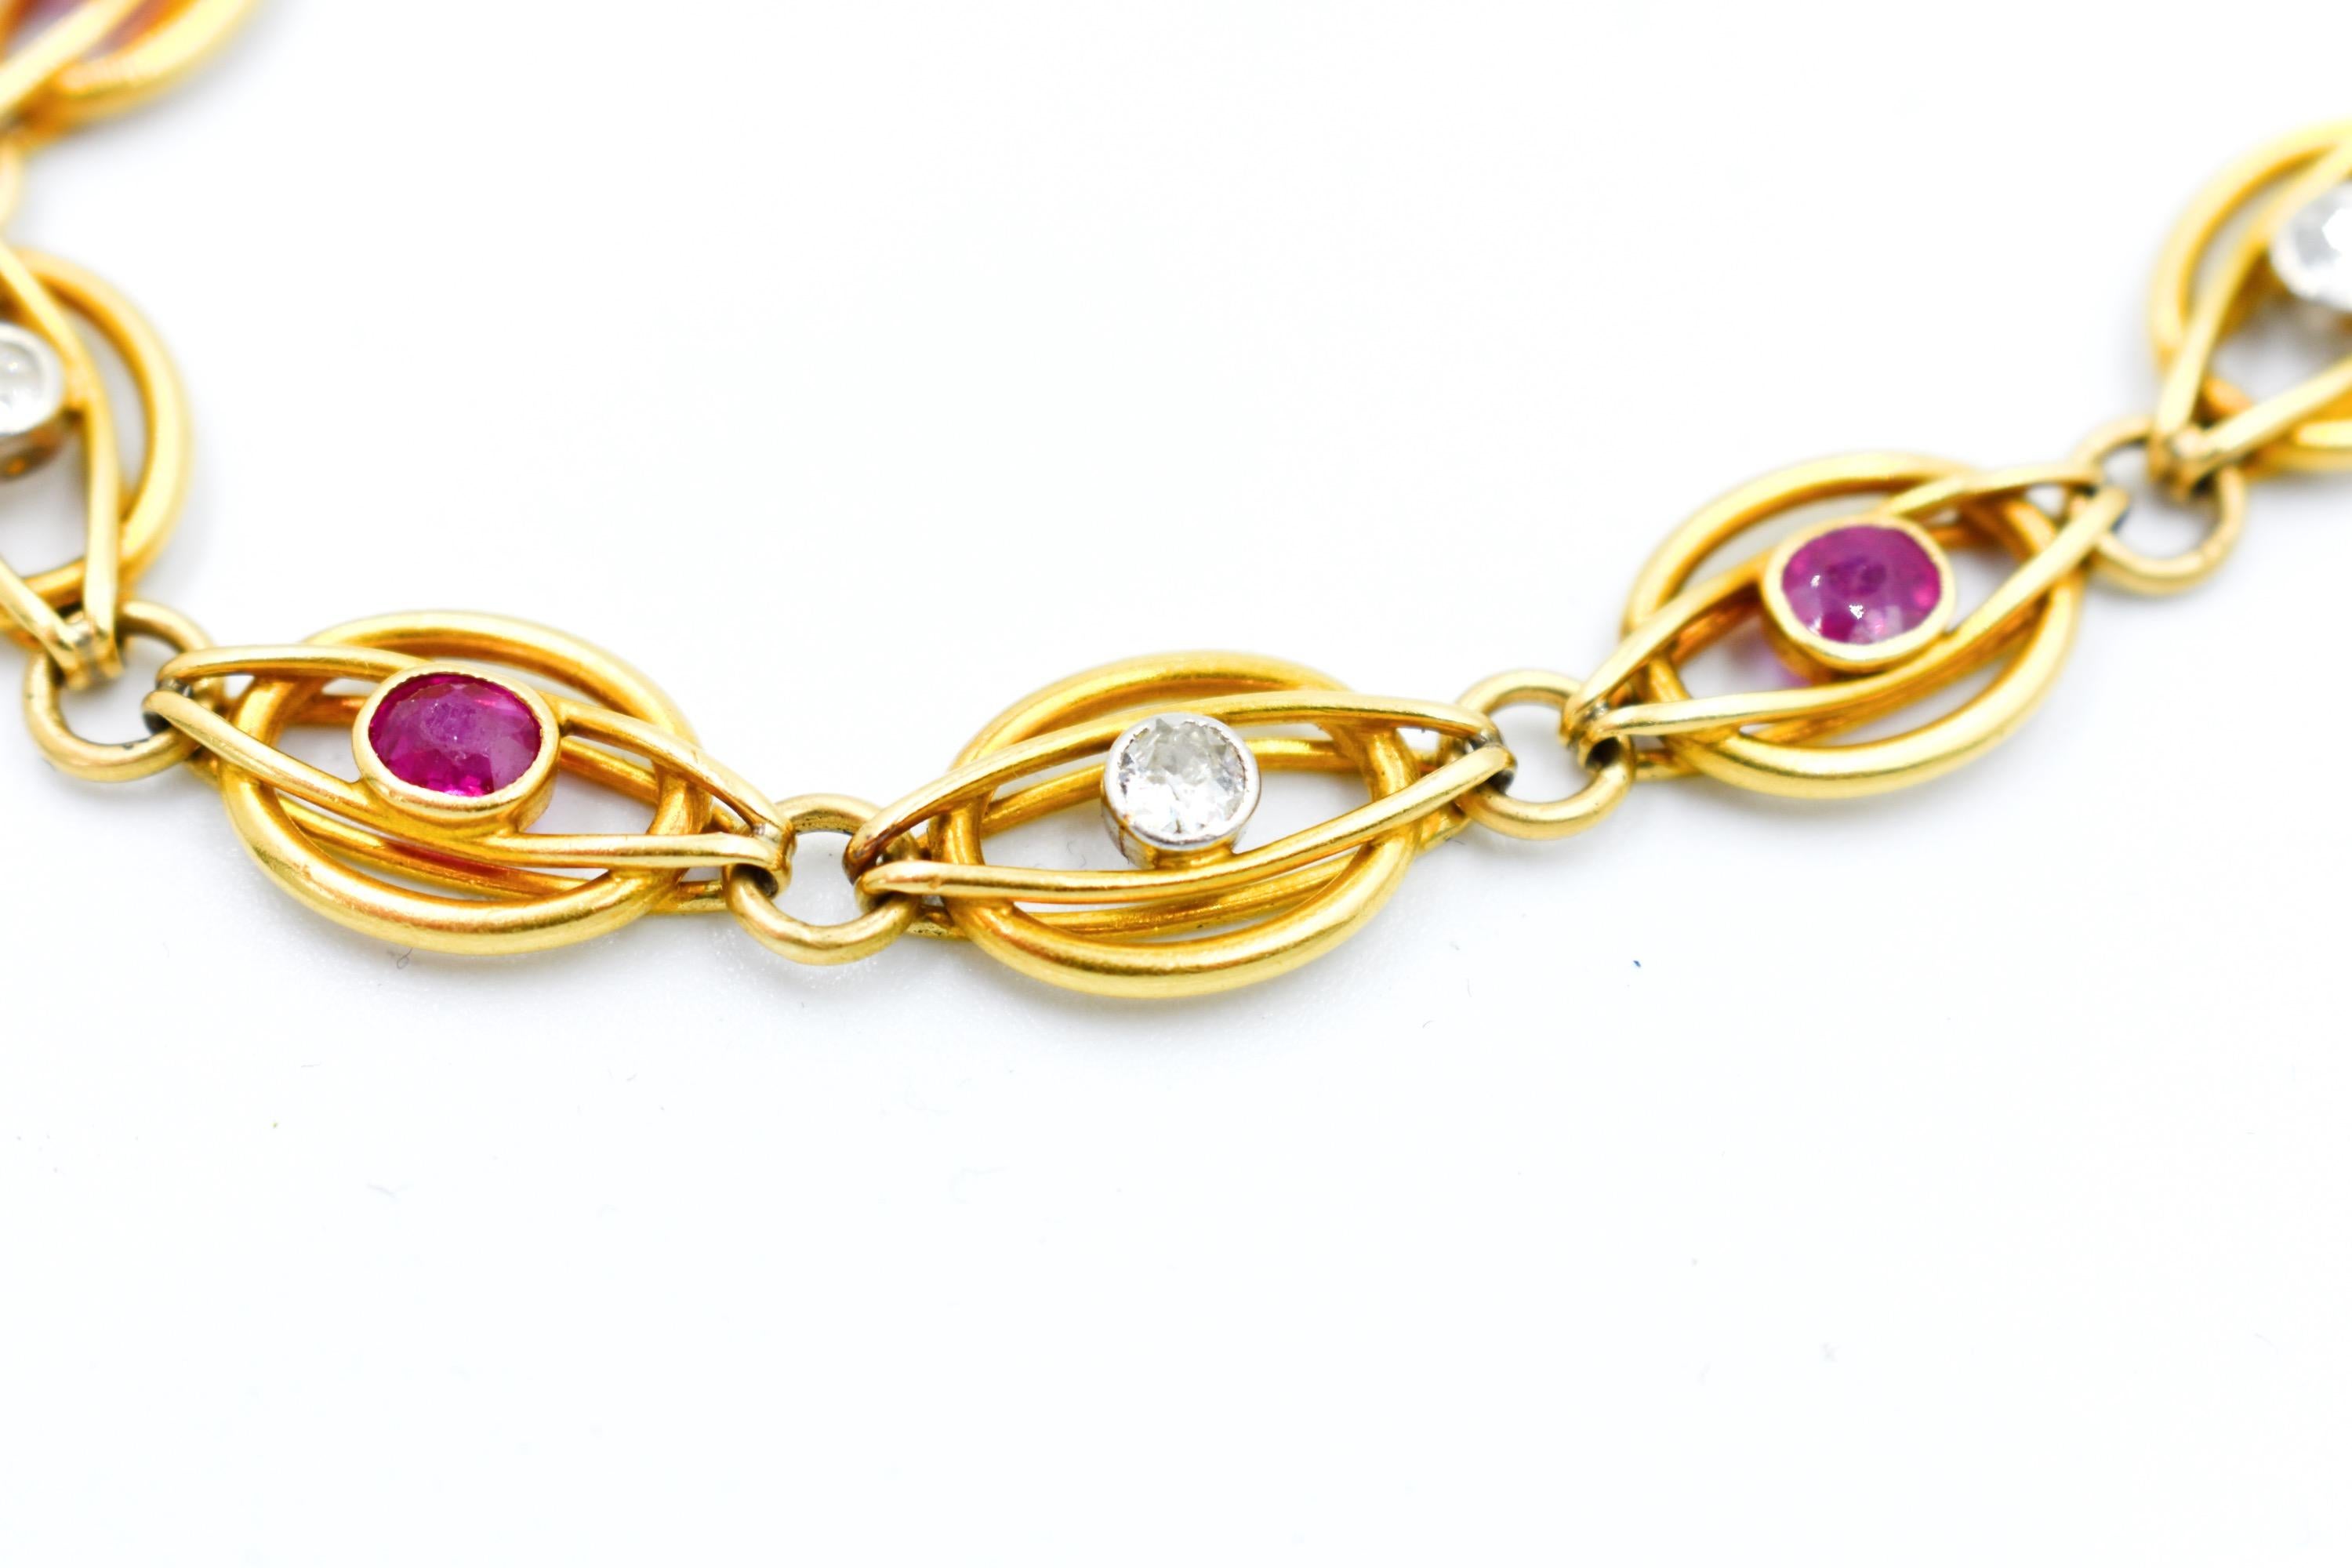 Discover this magnificent vintage bracelet from the 50's and 60's in 18-carat gold, a true period jewel evoking elegance and retro charm. This bracelet is composed of 10 openwork links, harmoniously alternating a ruby and a diamond in their